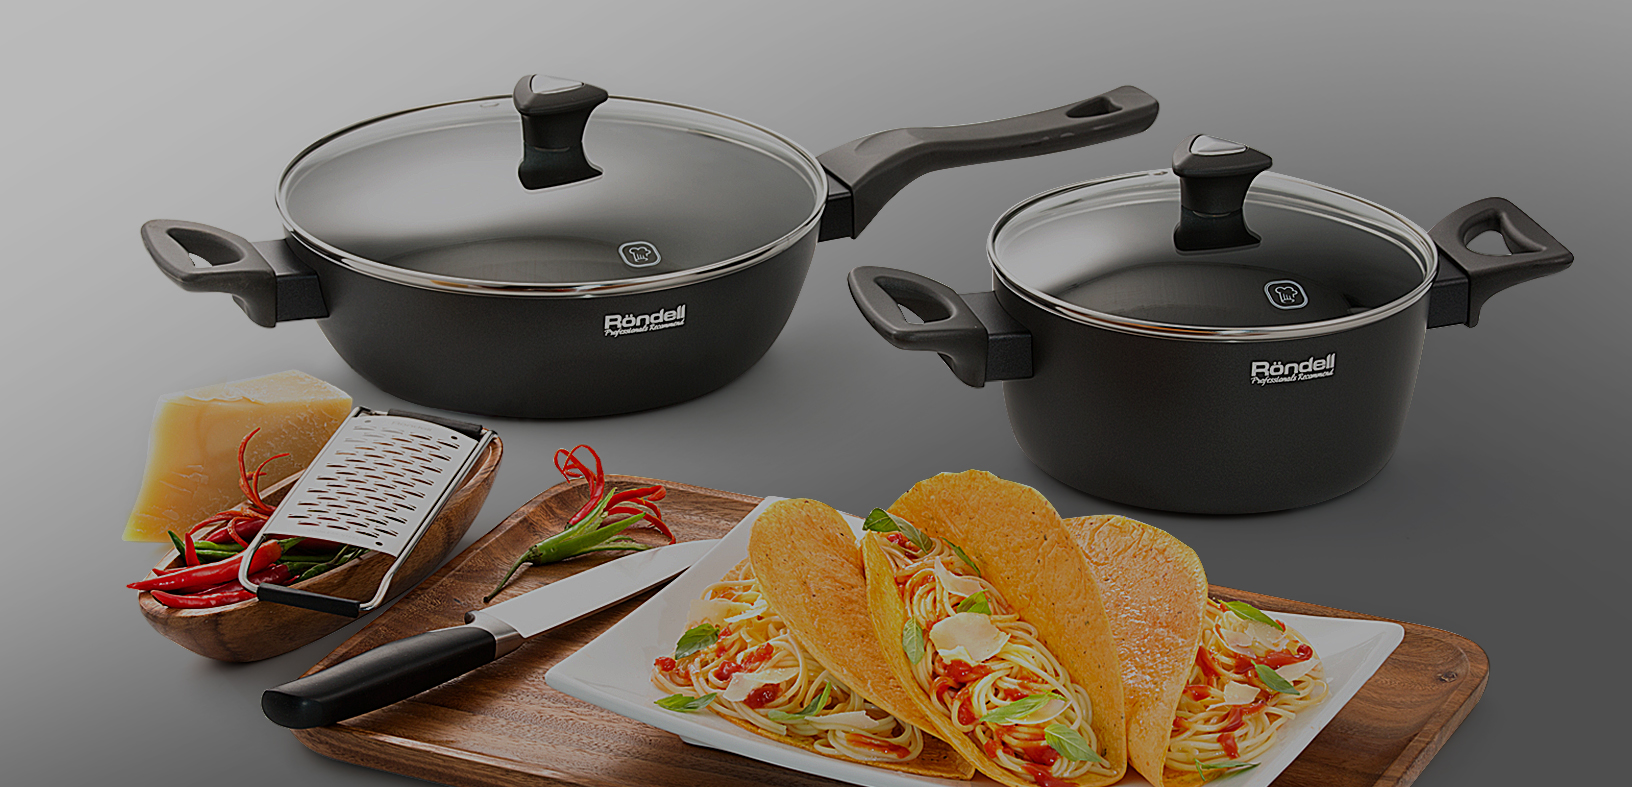 Cookware and accessories